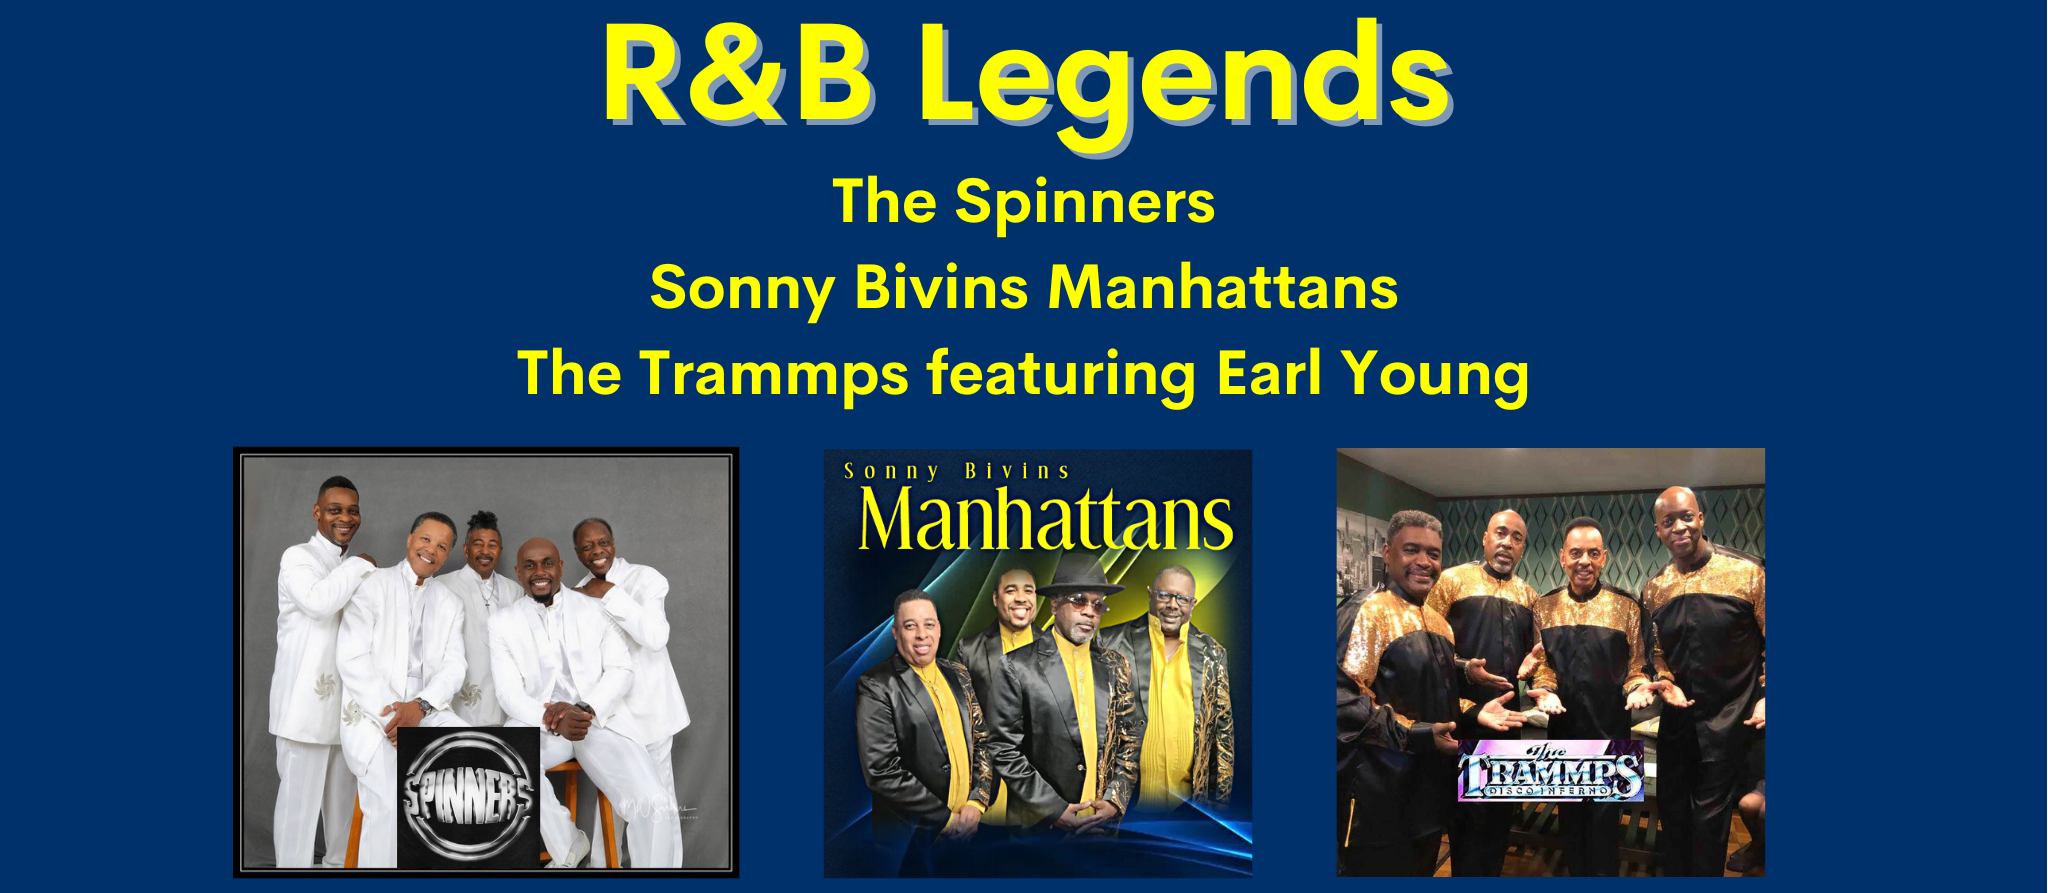 The Spinners, Manhattans, and Trammps